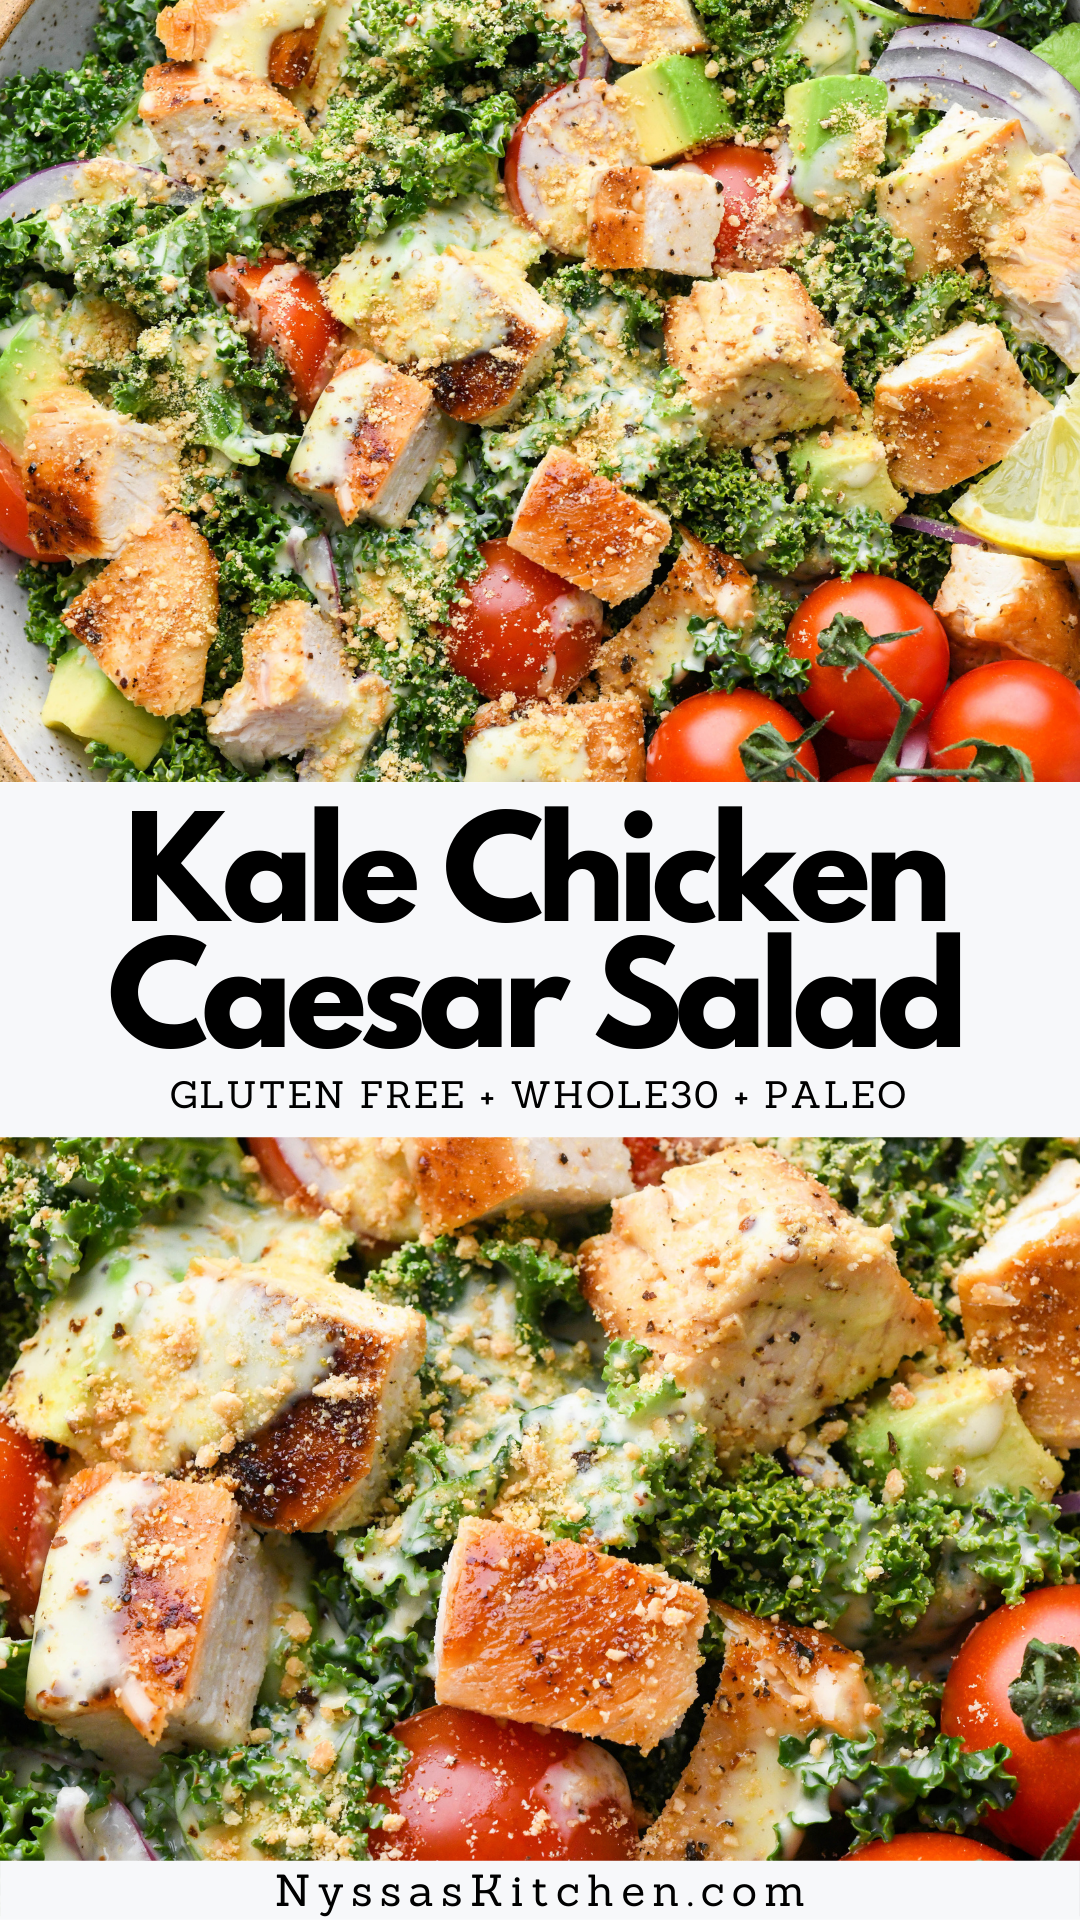 This Whole30 kale chicken Caesar salad is SUCH a crave worthy Whole30 meal! Made with hearty kale, perfectly seasoned chicken, a delightfully creamy homemade Whole30 caesar dressing, tomatoes, avocado, and red onion, and topped with a dairy free parmesan "cheese". Just like your favorite Caesar salad, but healthier! Whole30, paleo, gluten free, dairy Free.